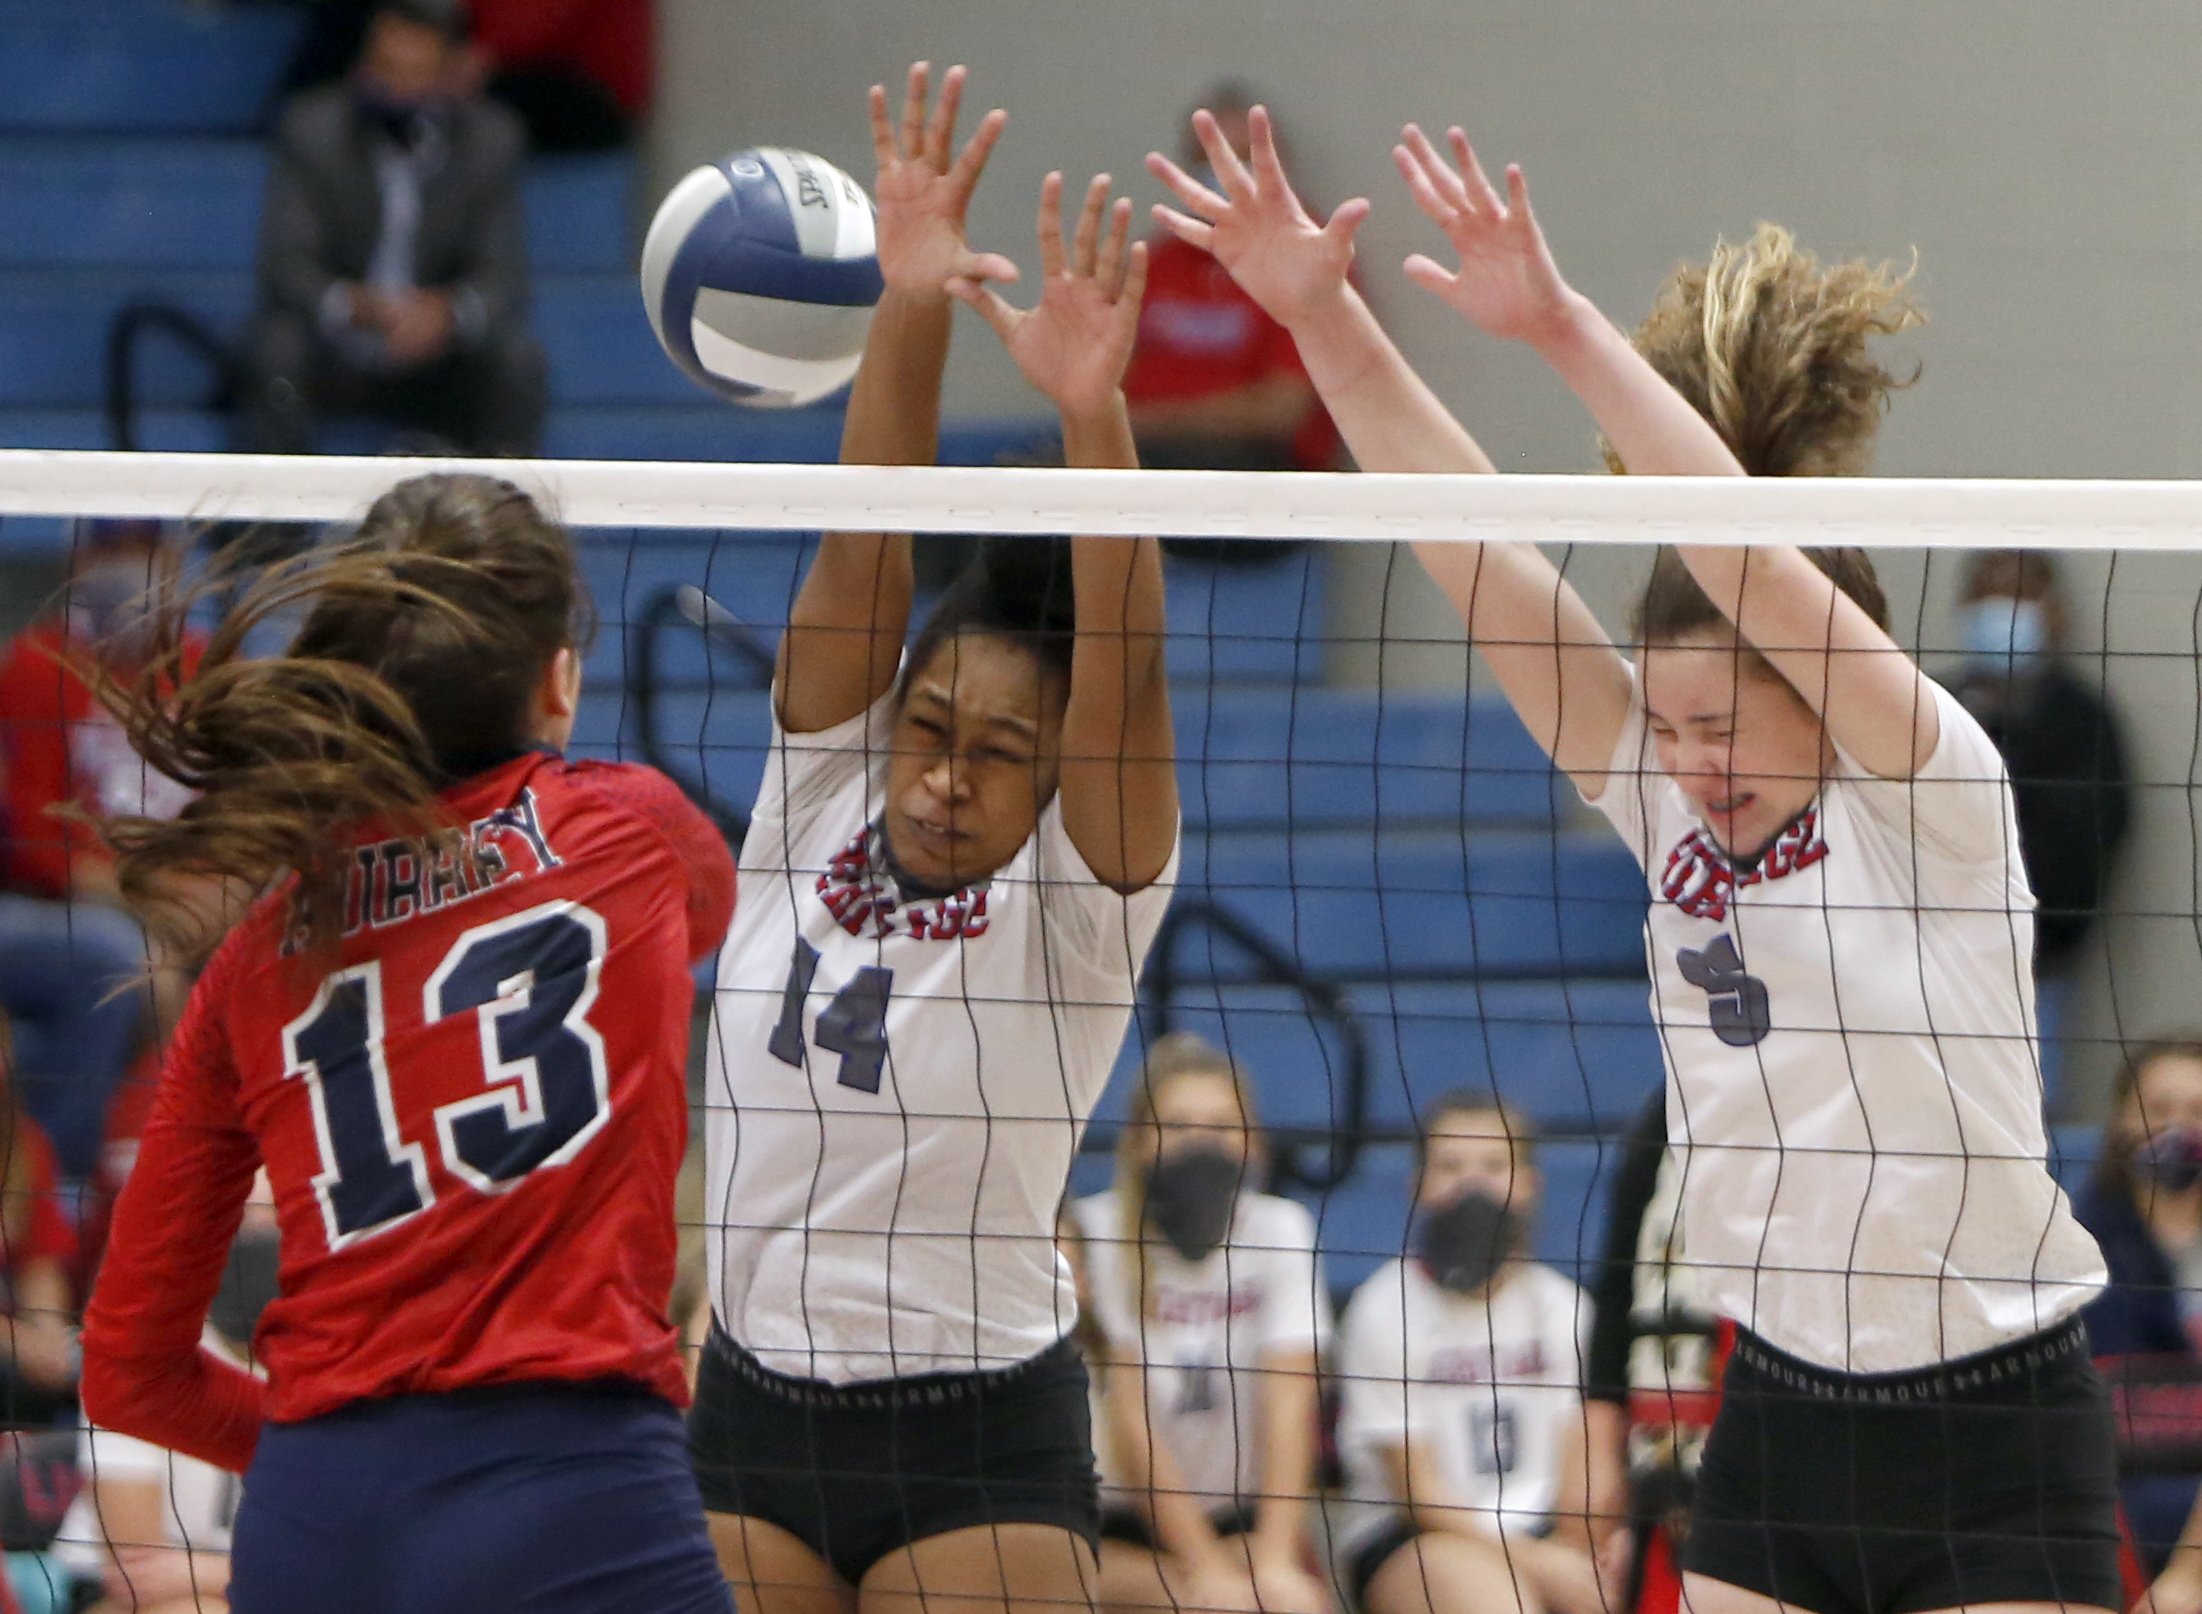 2020 UIL 4A volleyball playoff pairings State semifinal matchups are set, see results from previous rounds